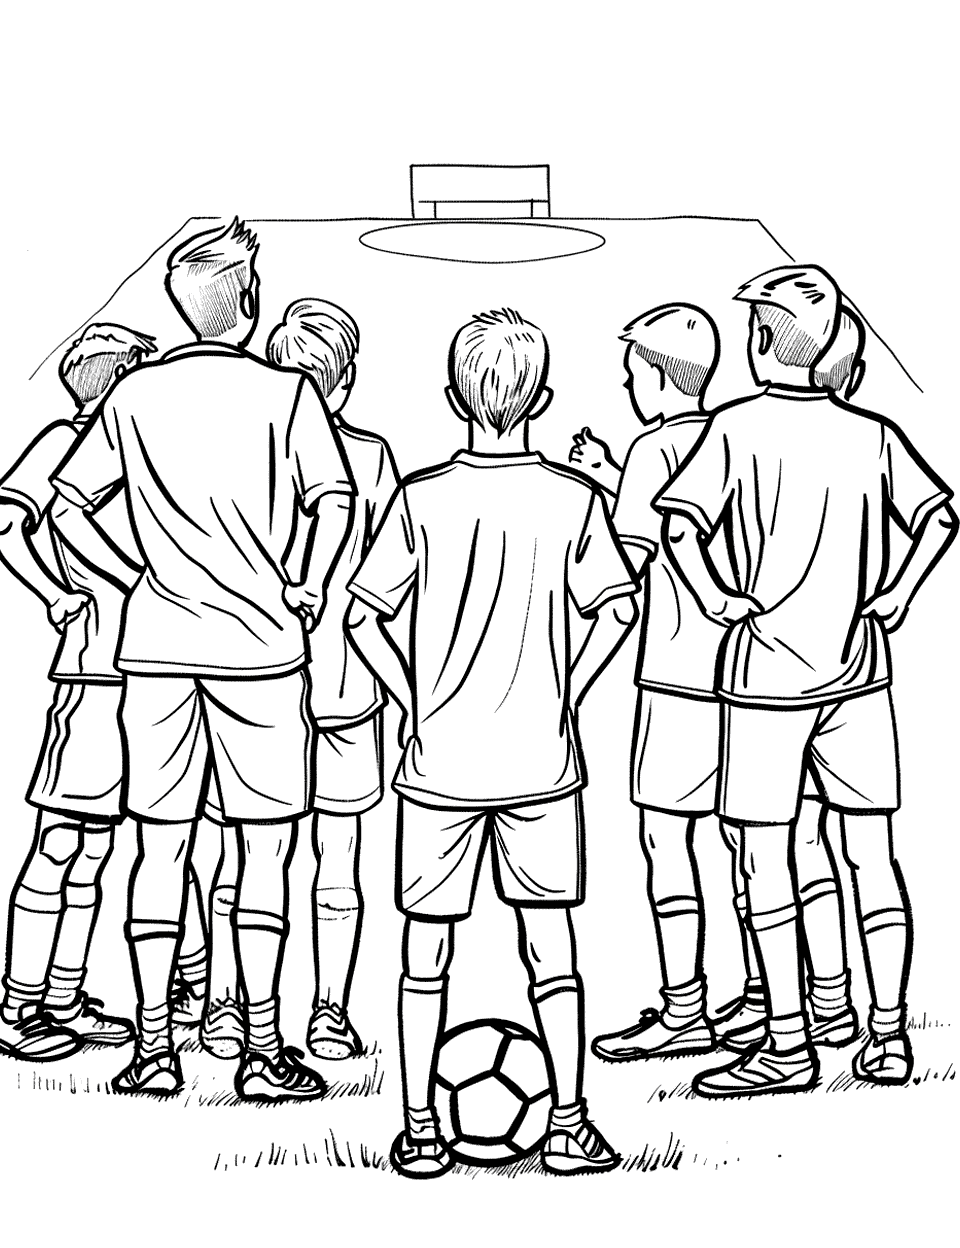 Team Strategy Meeting Soccer Coloring Page - A soccer team gathered discussing strategy with a field diagram.